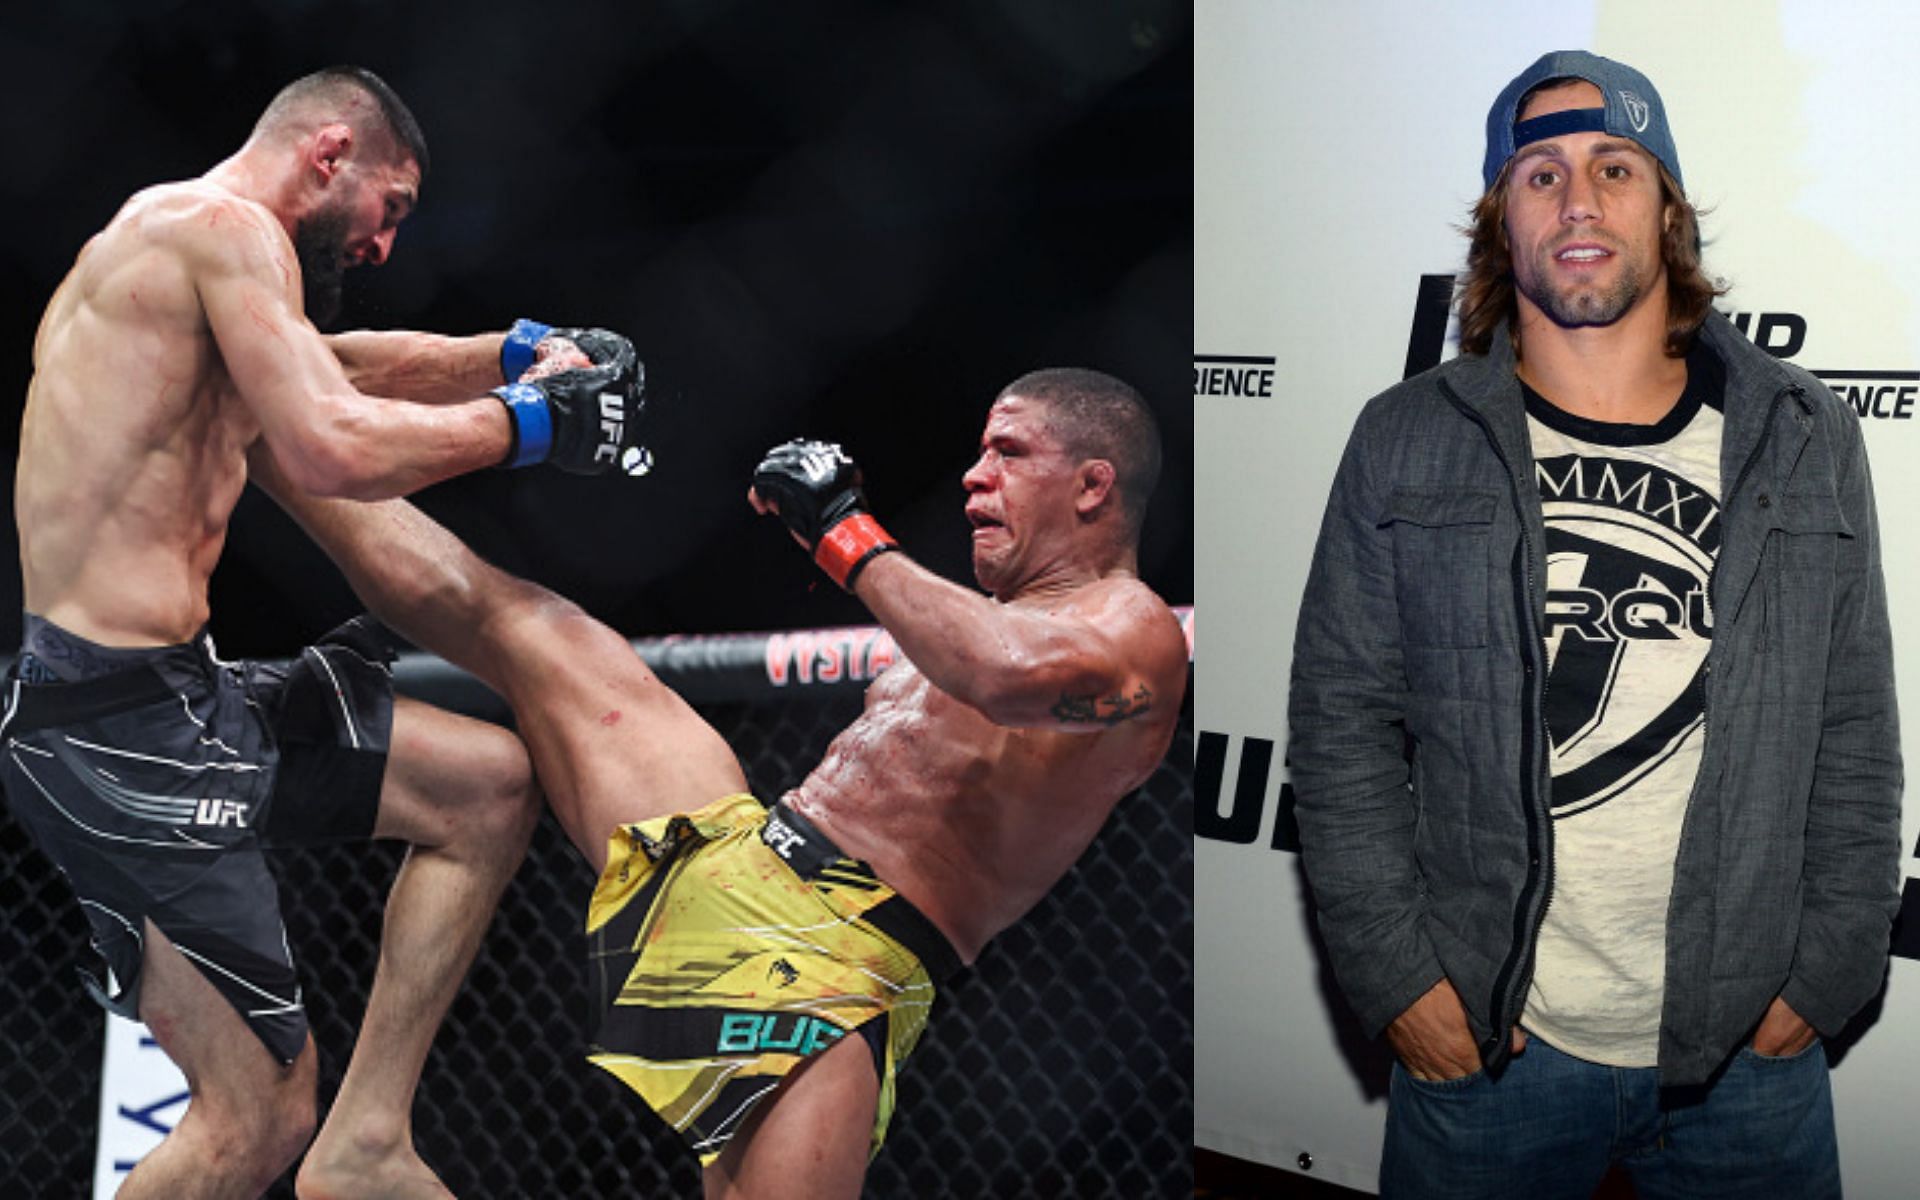 From left to right: Khamzat Chimaev, Gilbert Burns, and Urijah Faber